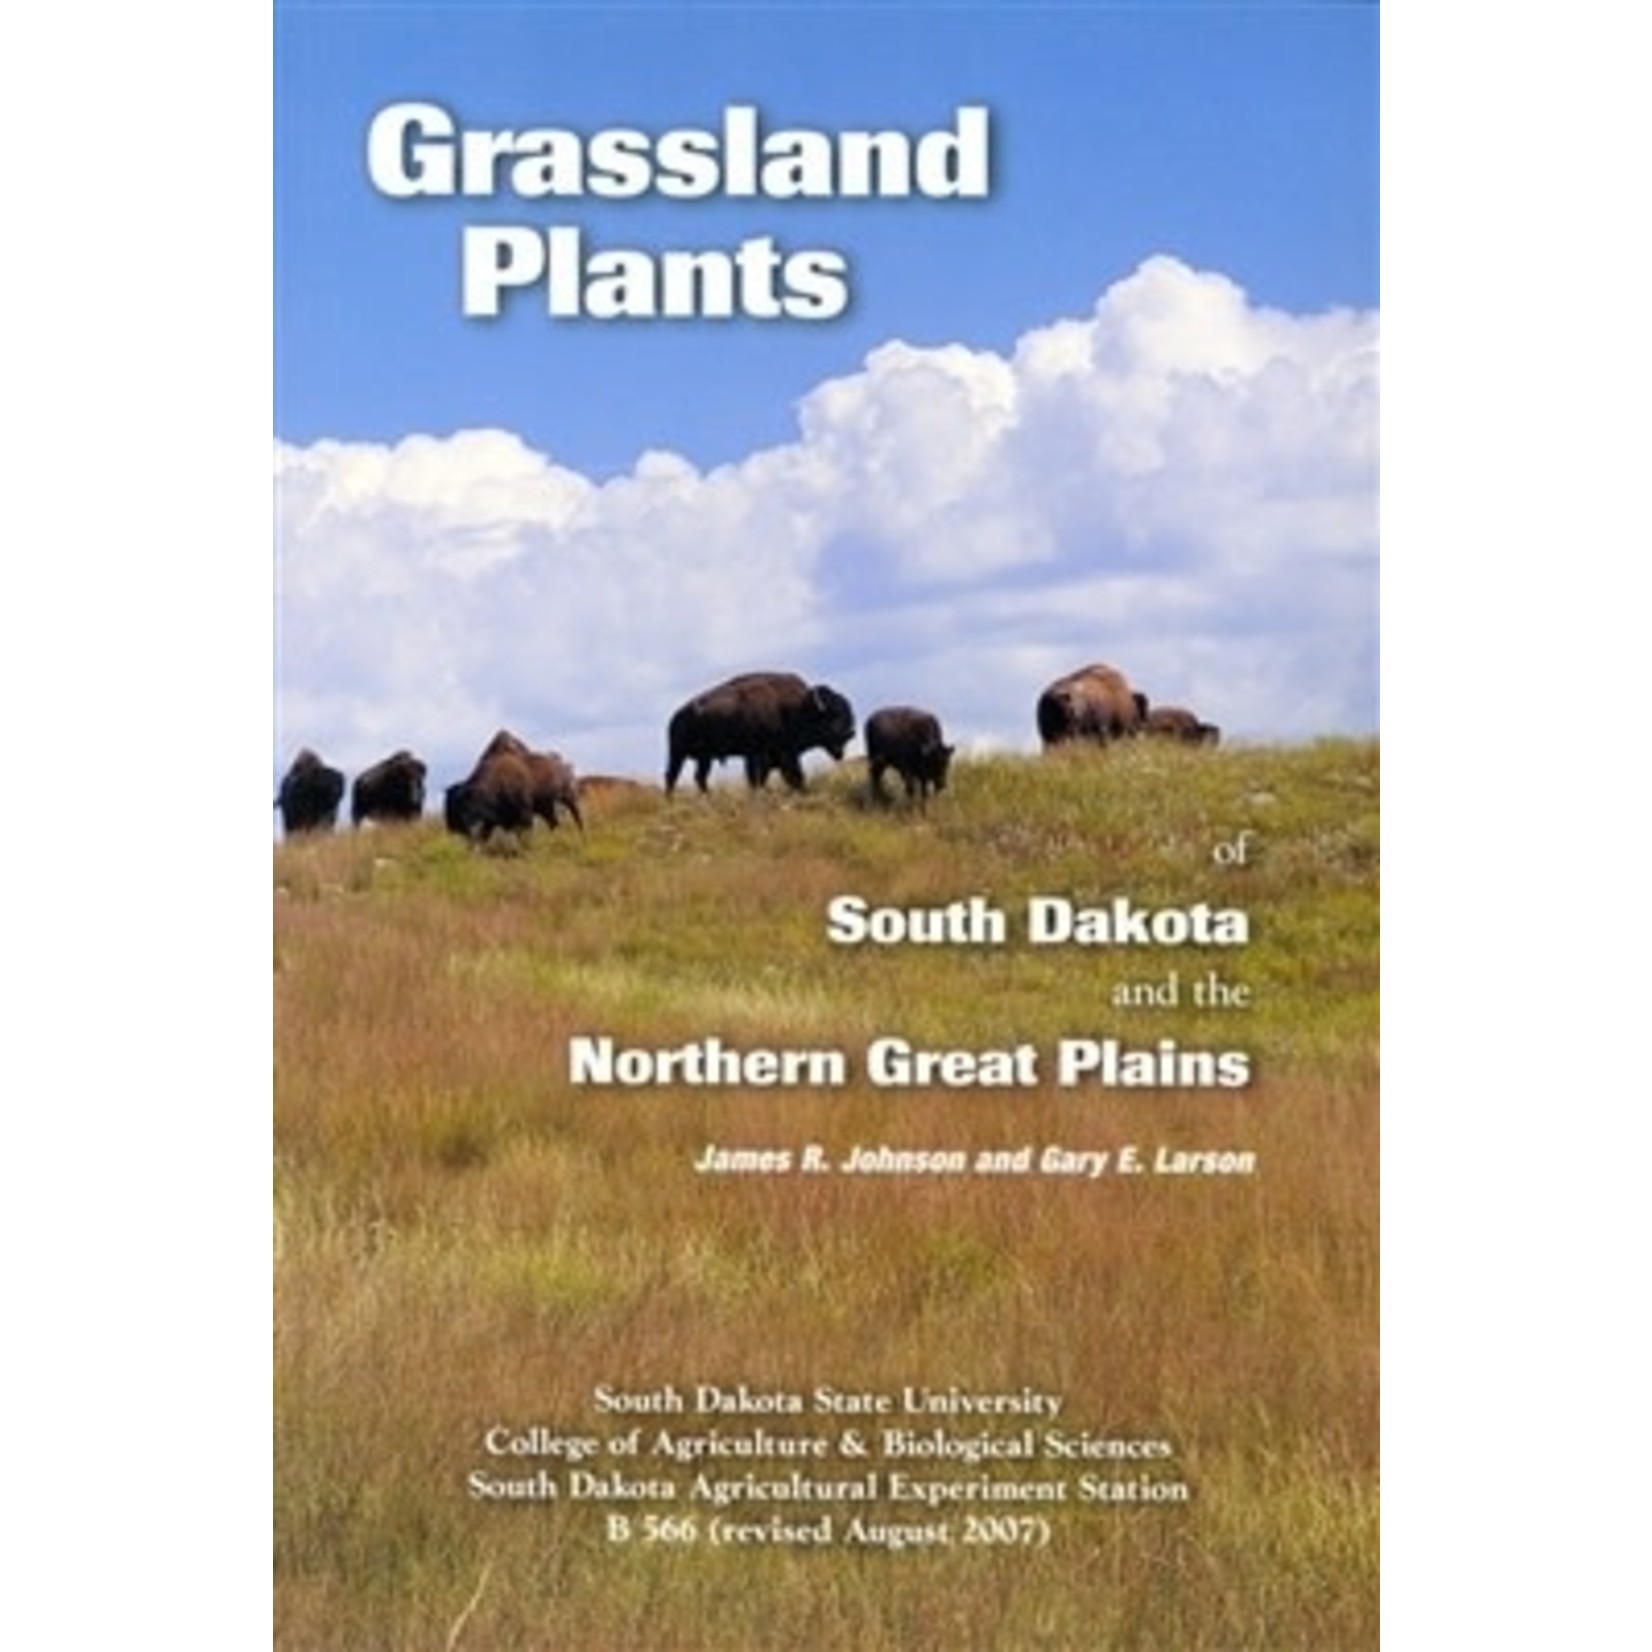 Grassland Plants of South Dakota and the Northern Great Plains